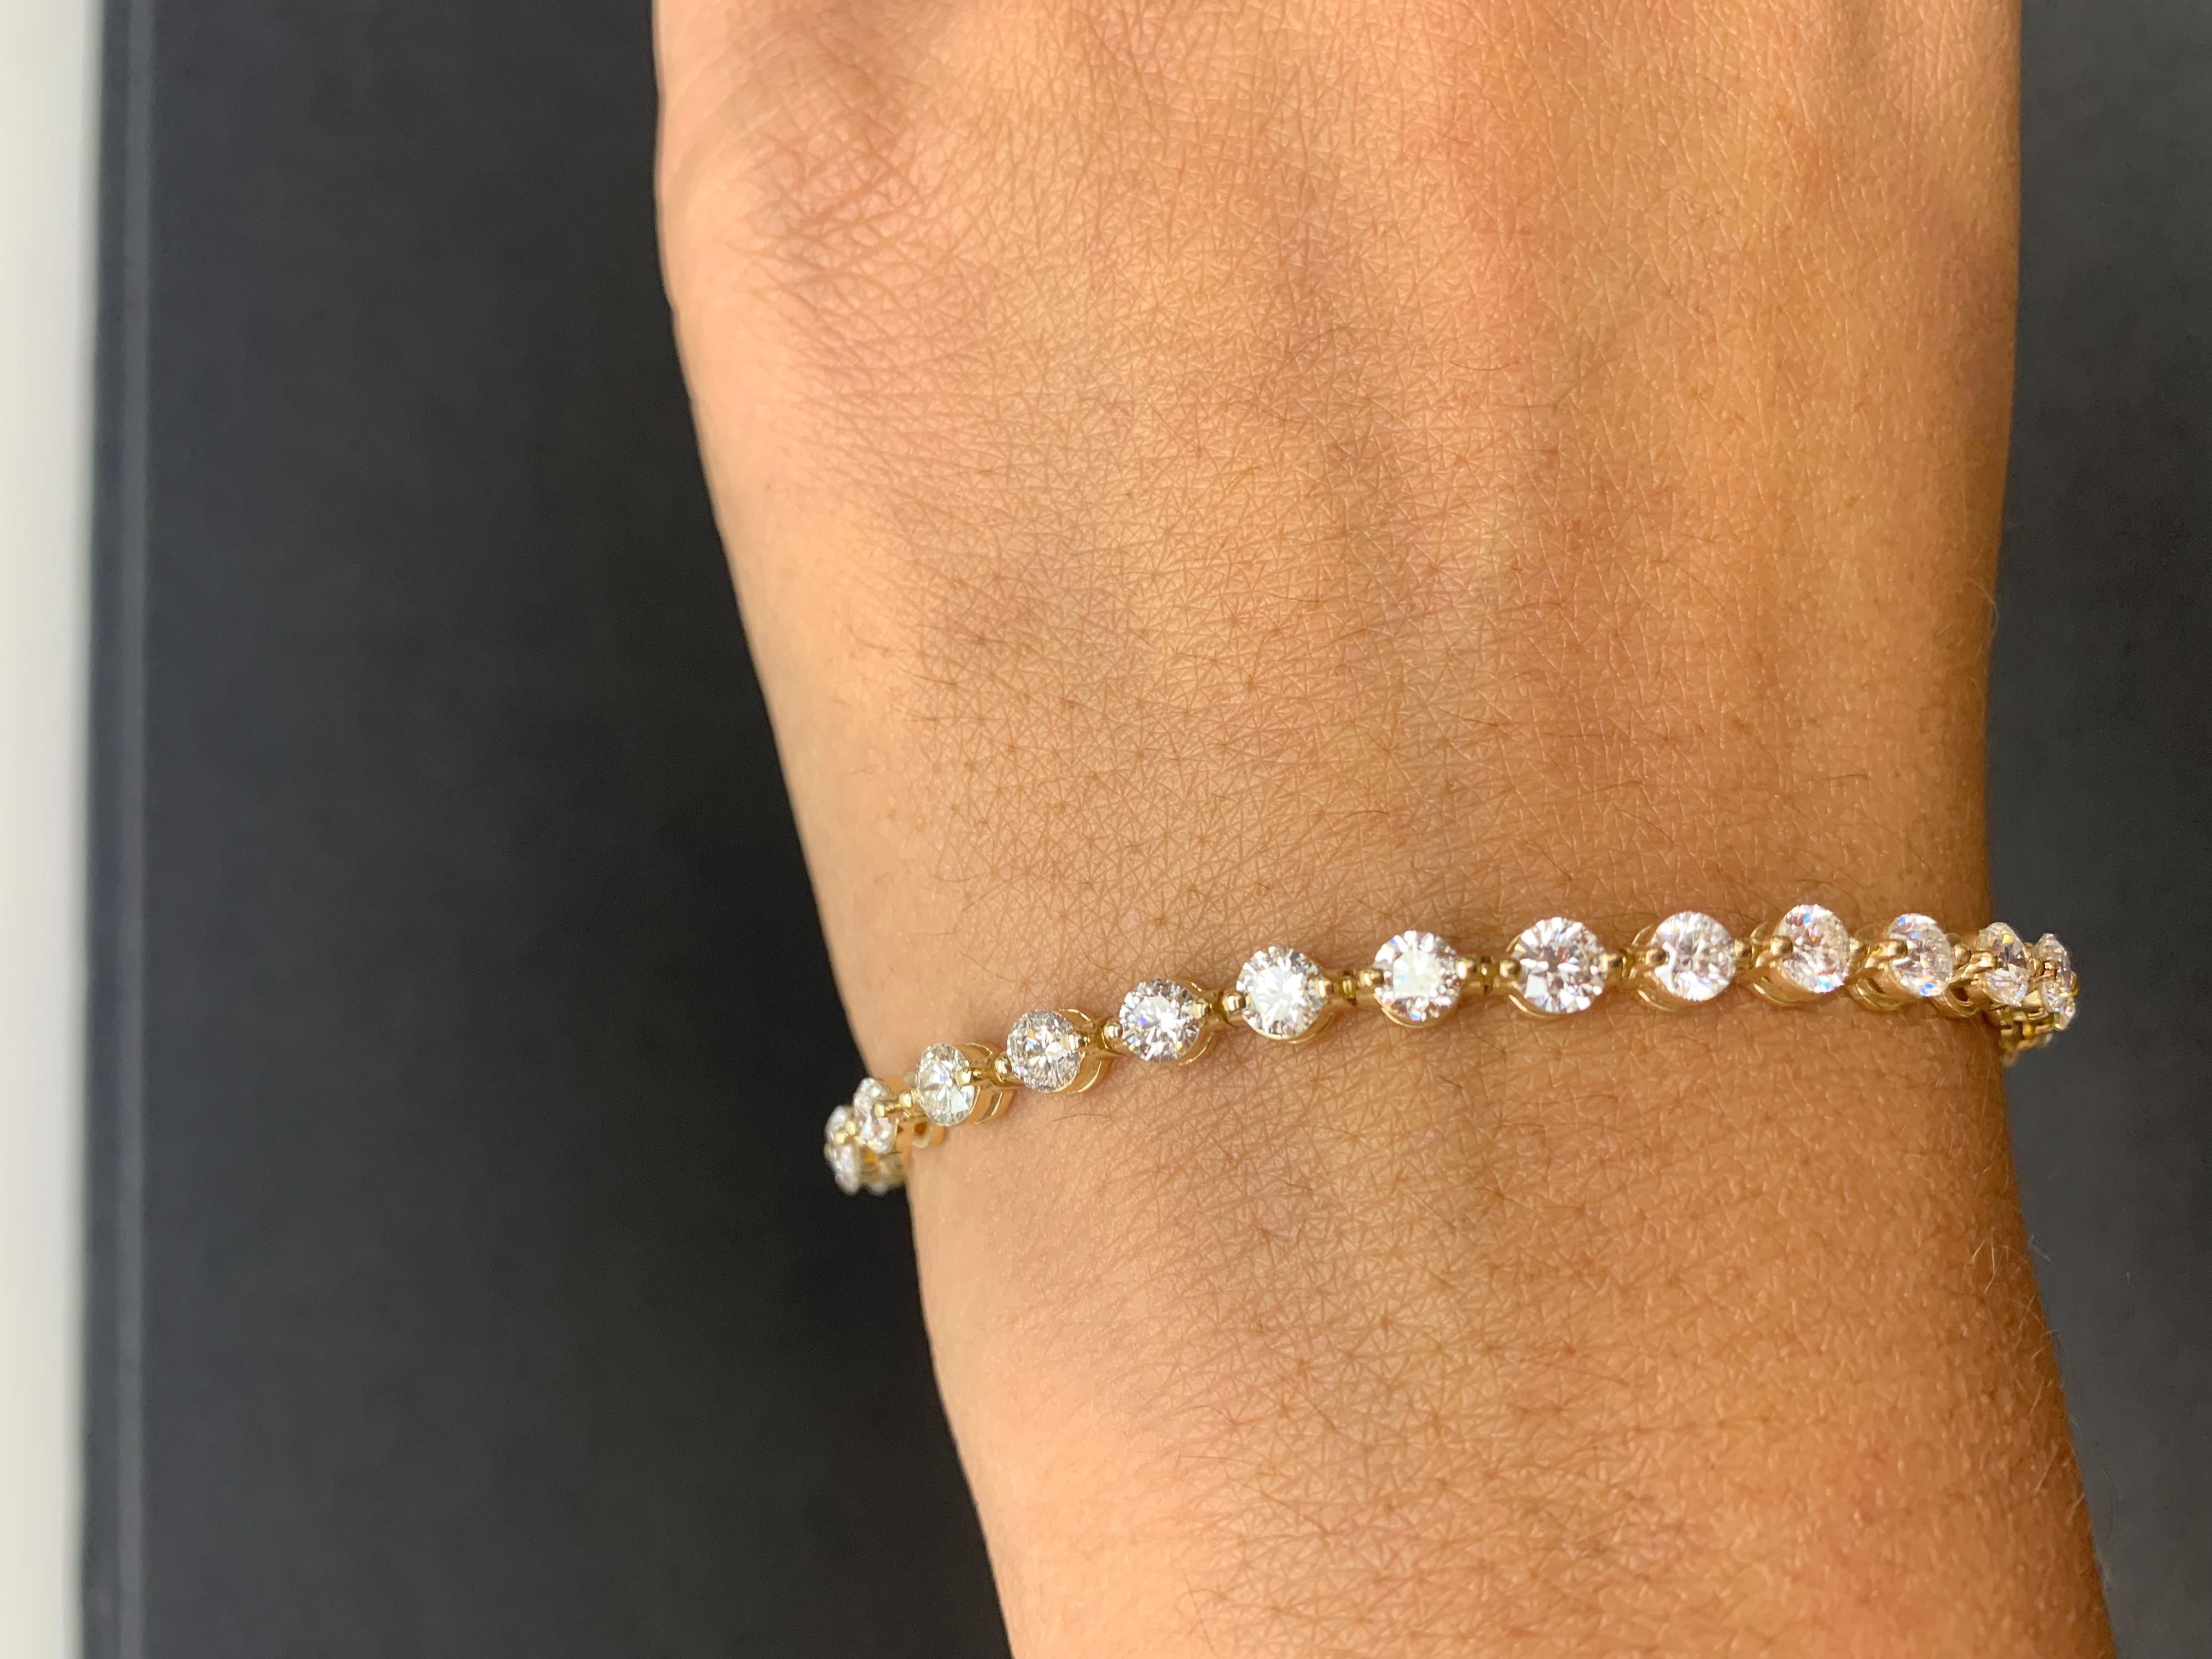 A stunning bracelet set with 32 Brilliant cut Diamonds weighing 7.01 carats total.  Set in polished 14k yellow gold. Double lock mechanism for maximum security. A simple yet dazzling piece.

All diamonds are GH color SI1 Clarity.
Available in white